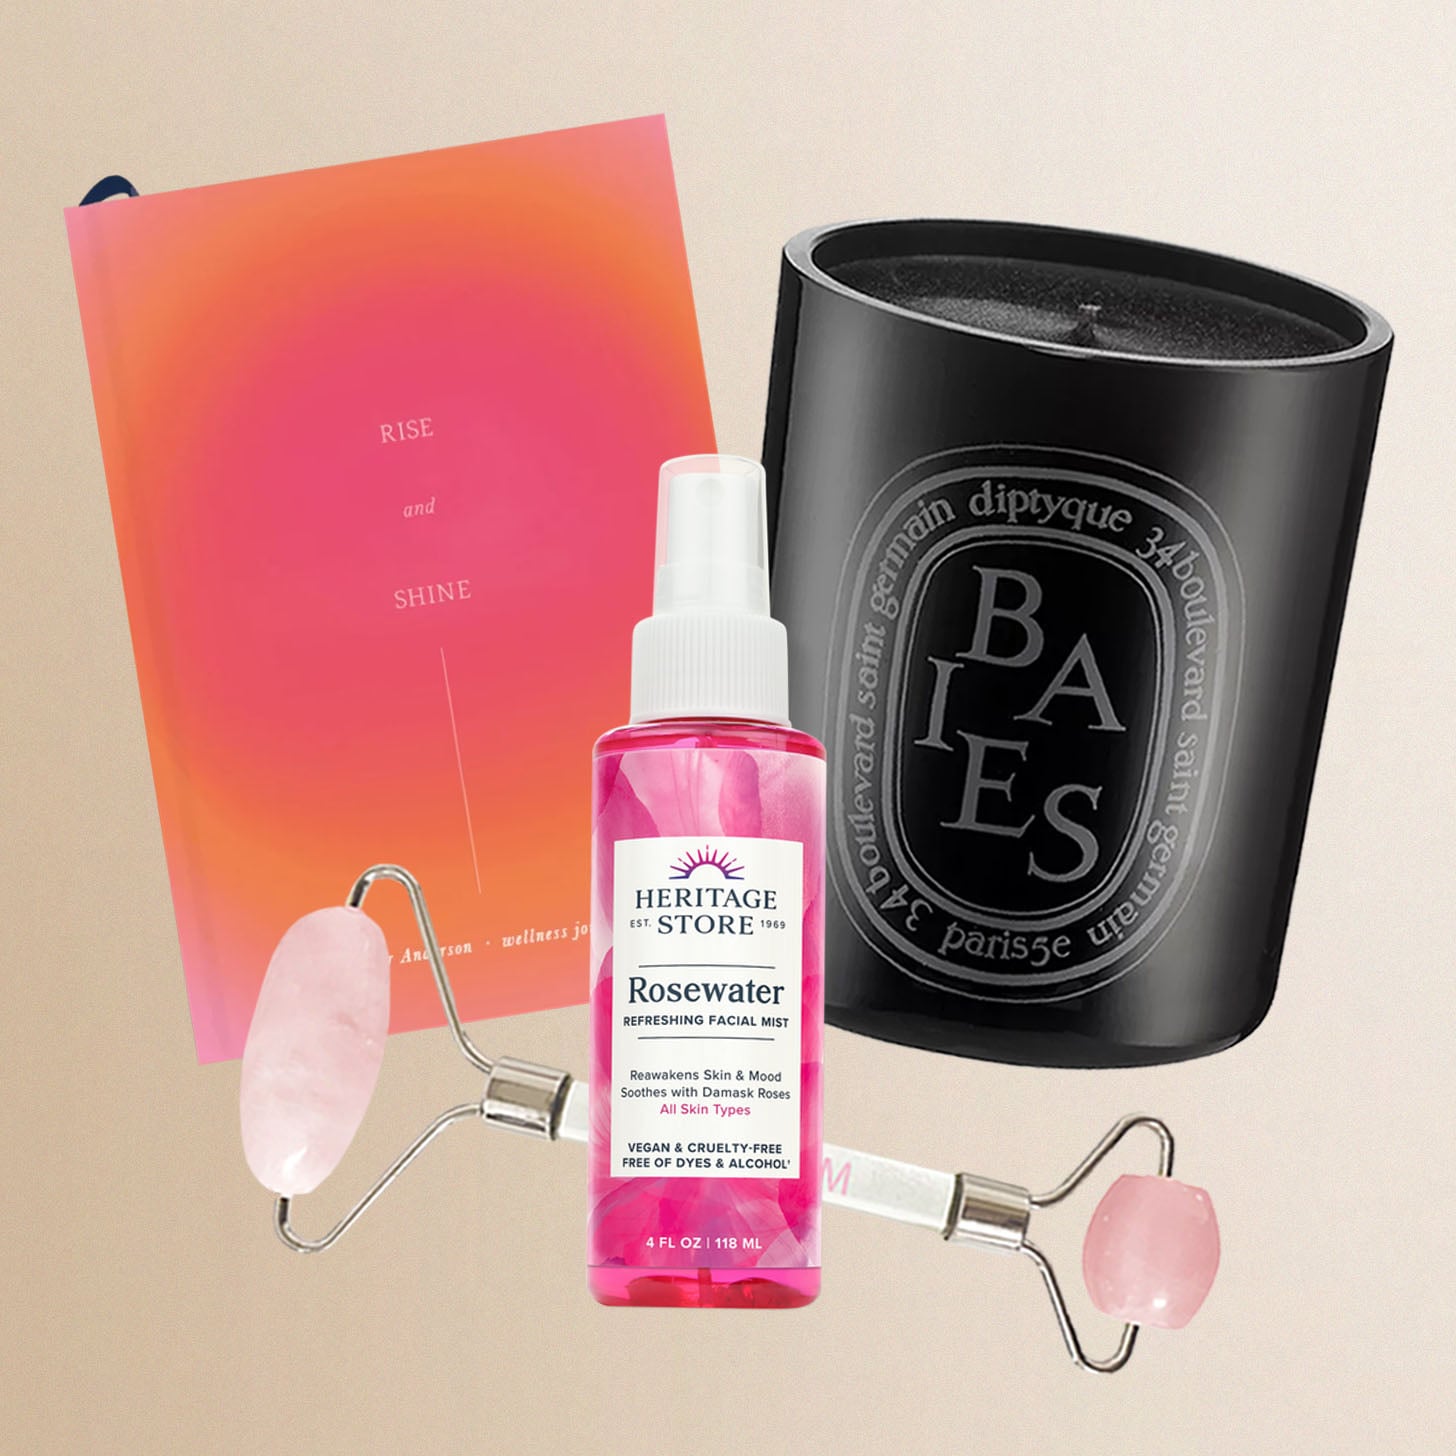 The Ultimate Wellness Gift Guide: 15 Self-Care Gifts